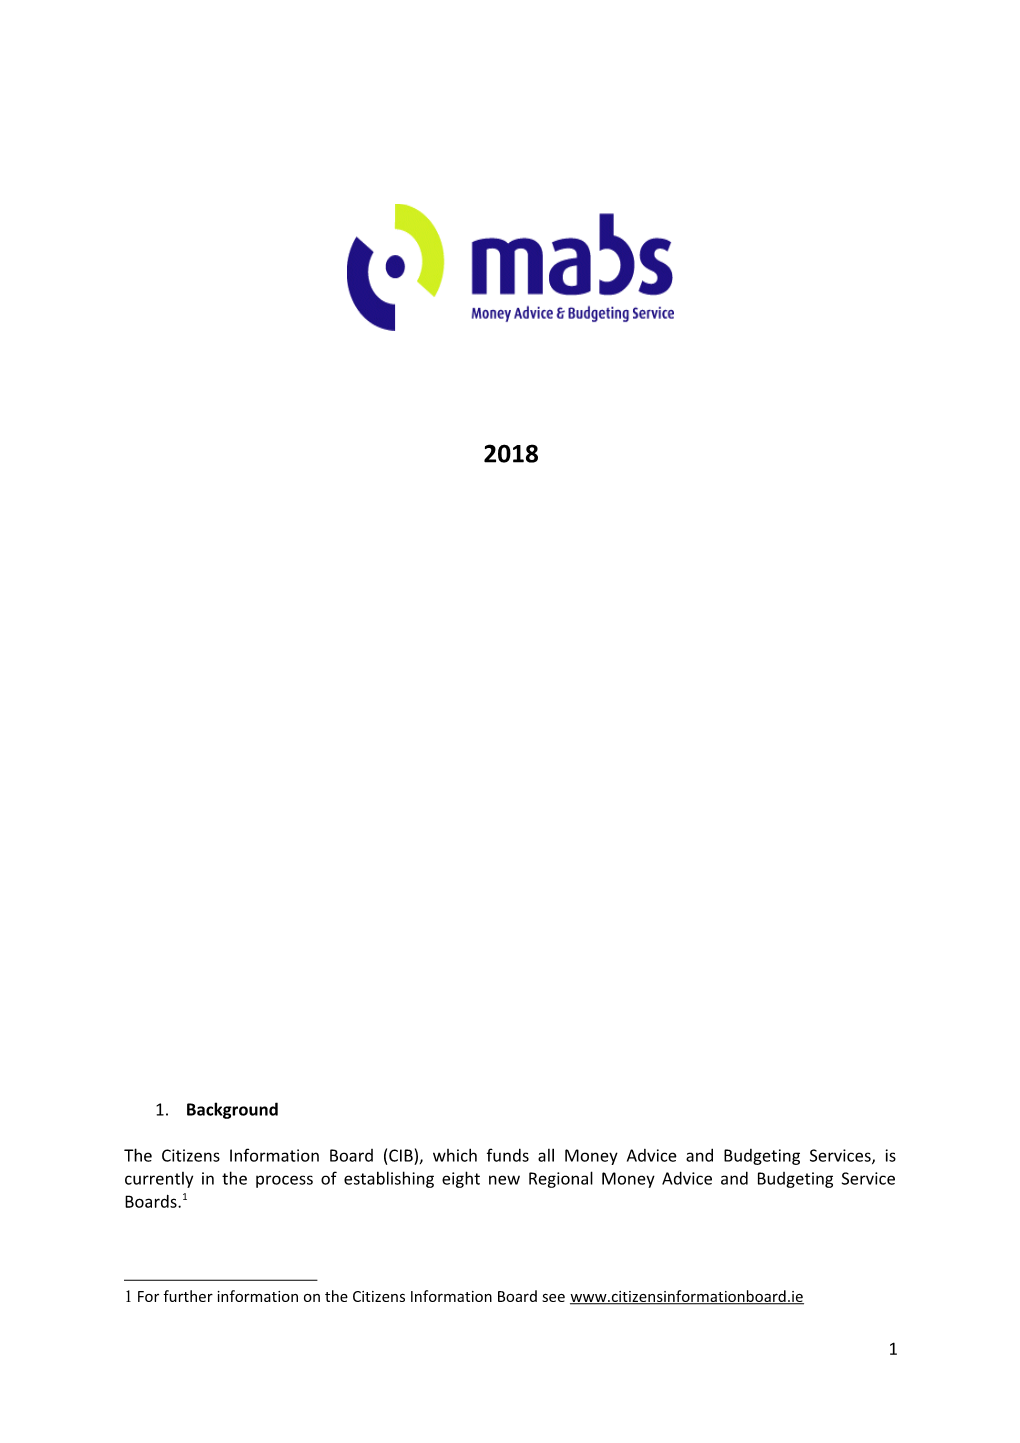 The Money Advice and Budgeting Service (MABS)